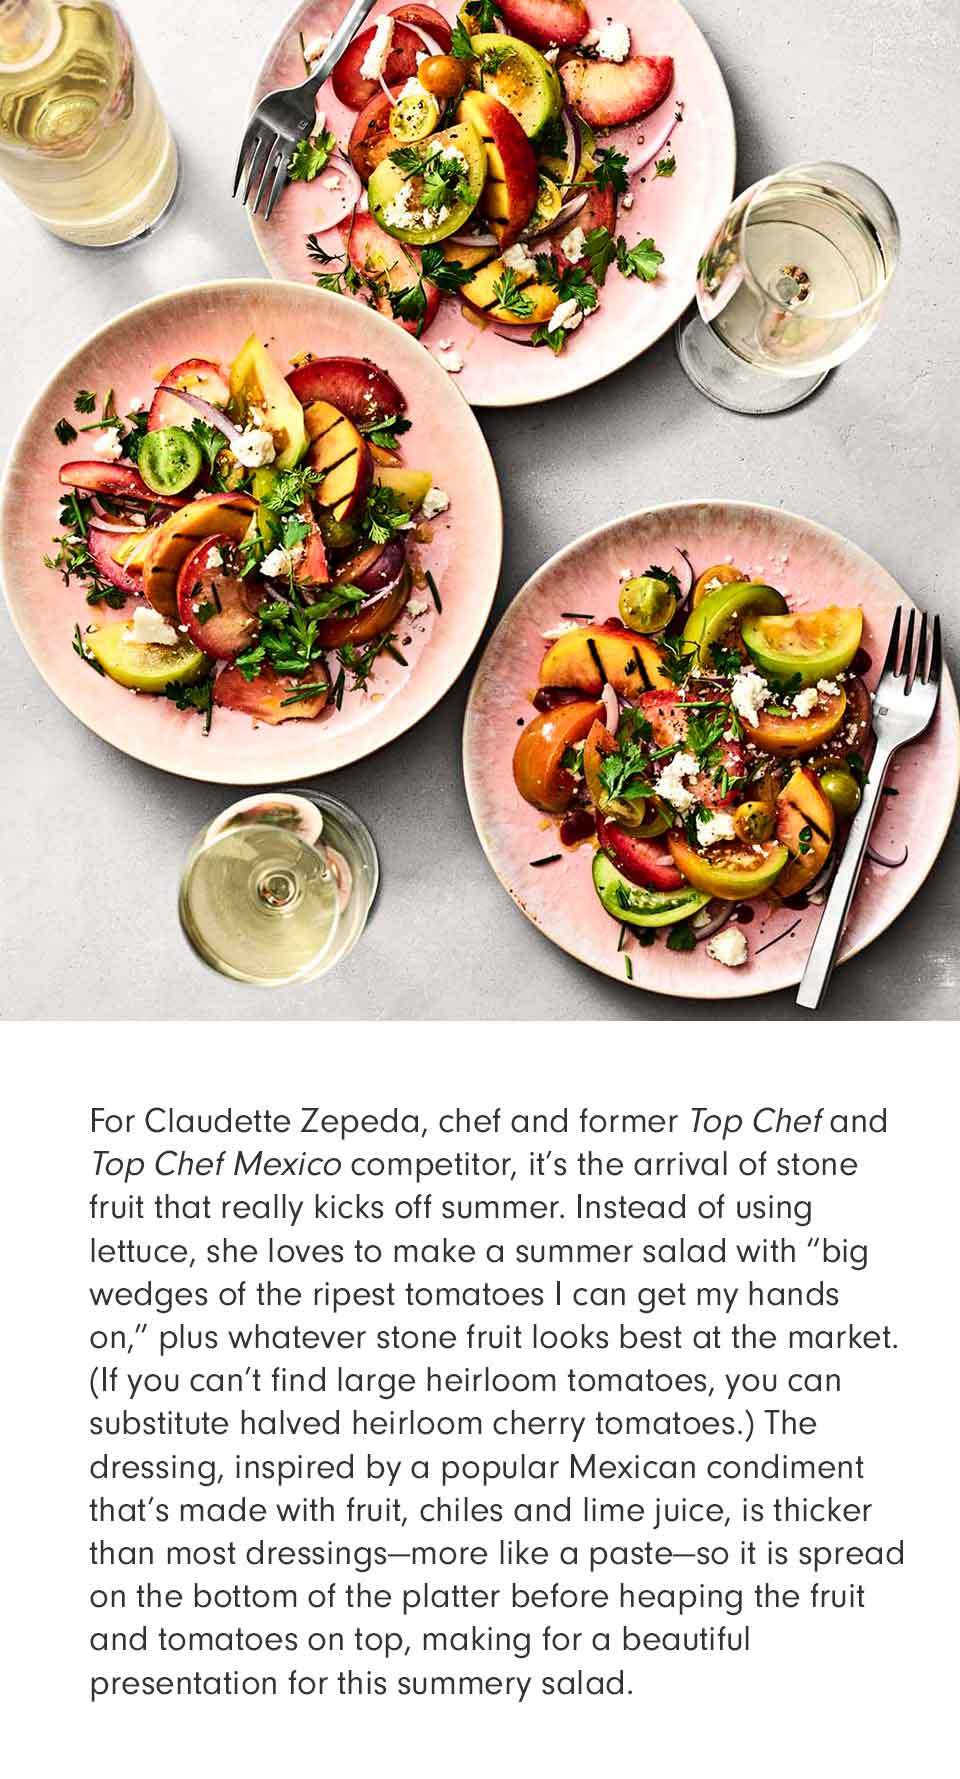 Claudette Zepeda's Summer Salad with Chamoy Dressing